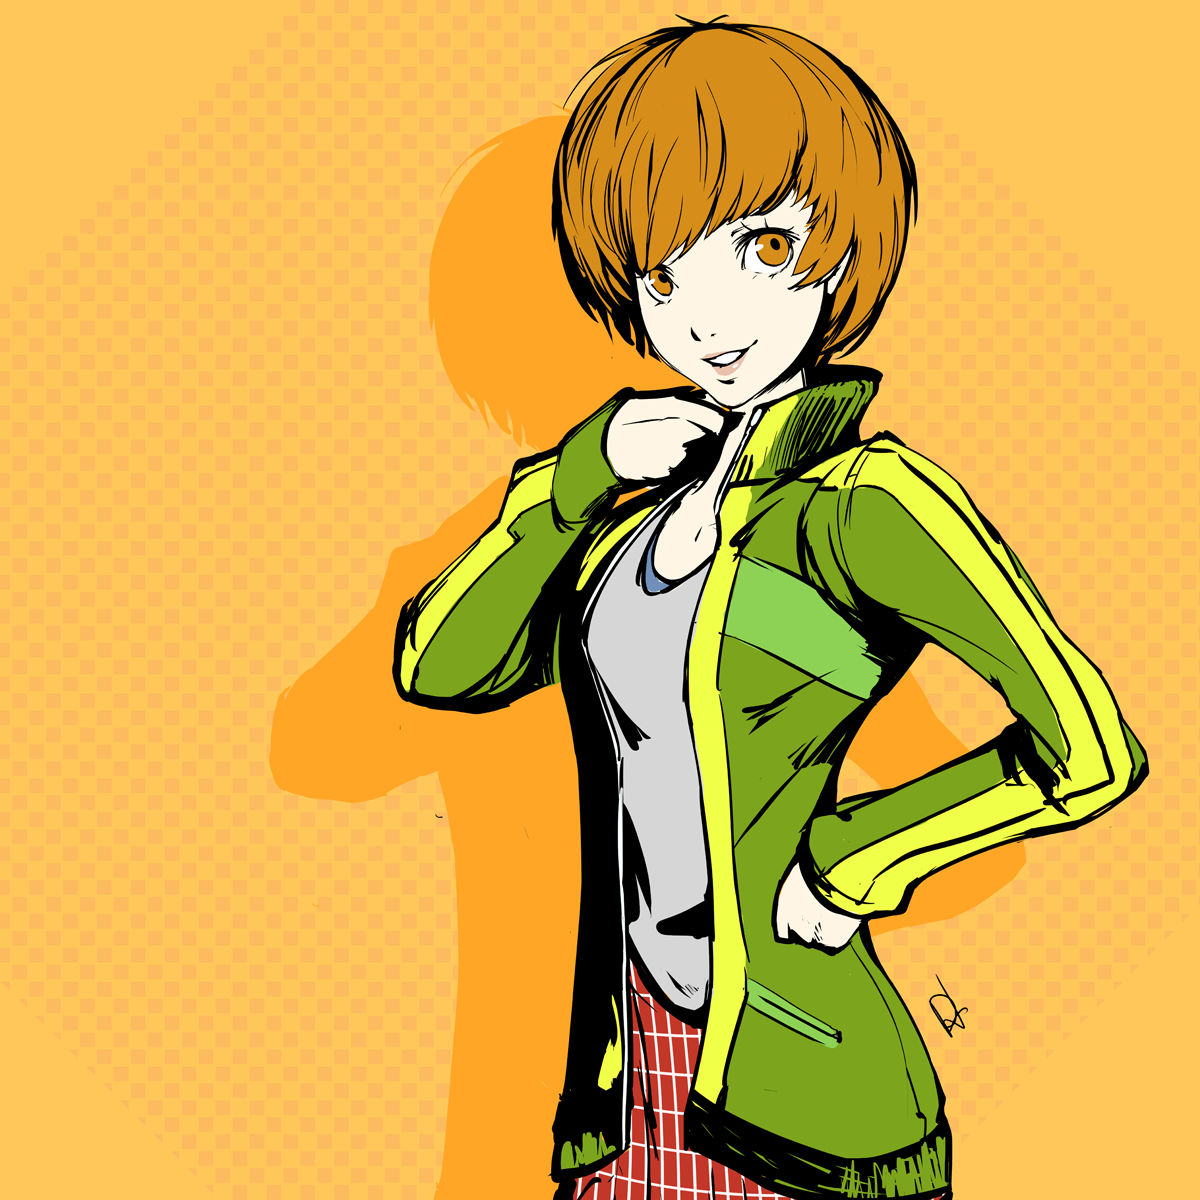 Chie posts - The Brink of Memories - Art by a Persona fan